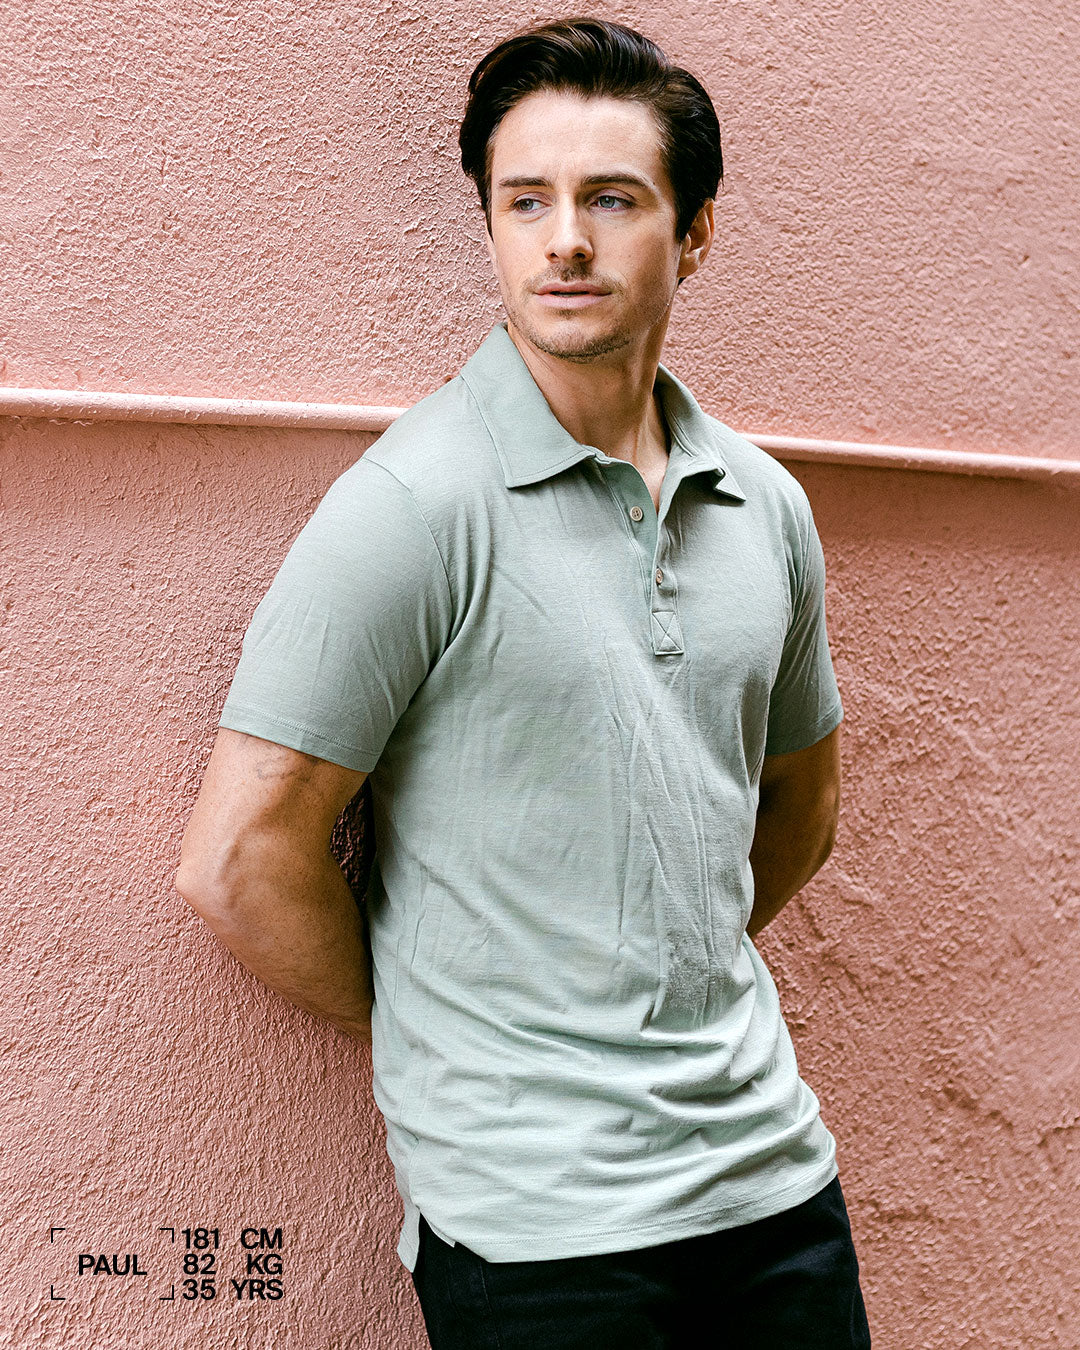 STAY 4°C COOLER IN SUMMER WITH SUPERFINE MERINO WOOL TEES FOR MEN | Citizen Wolf